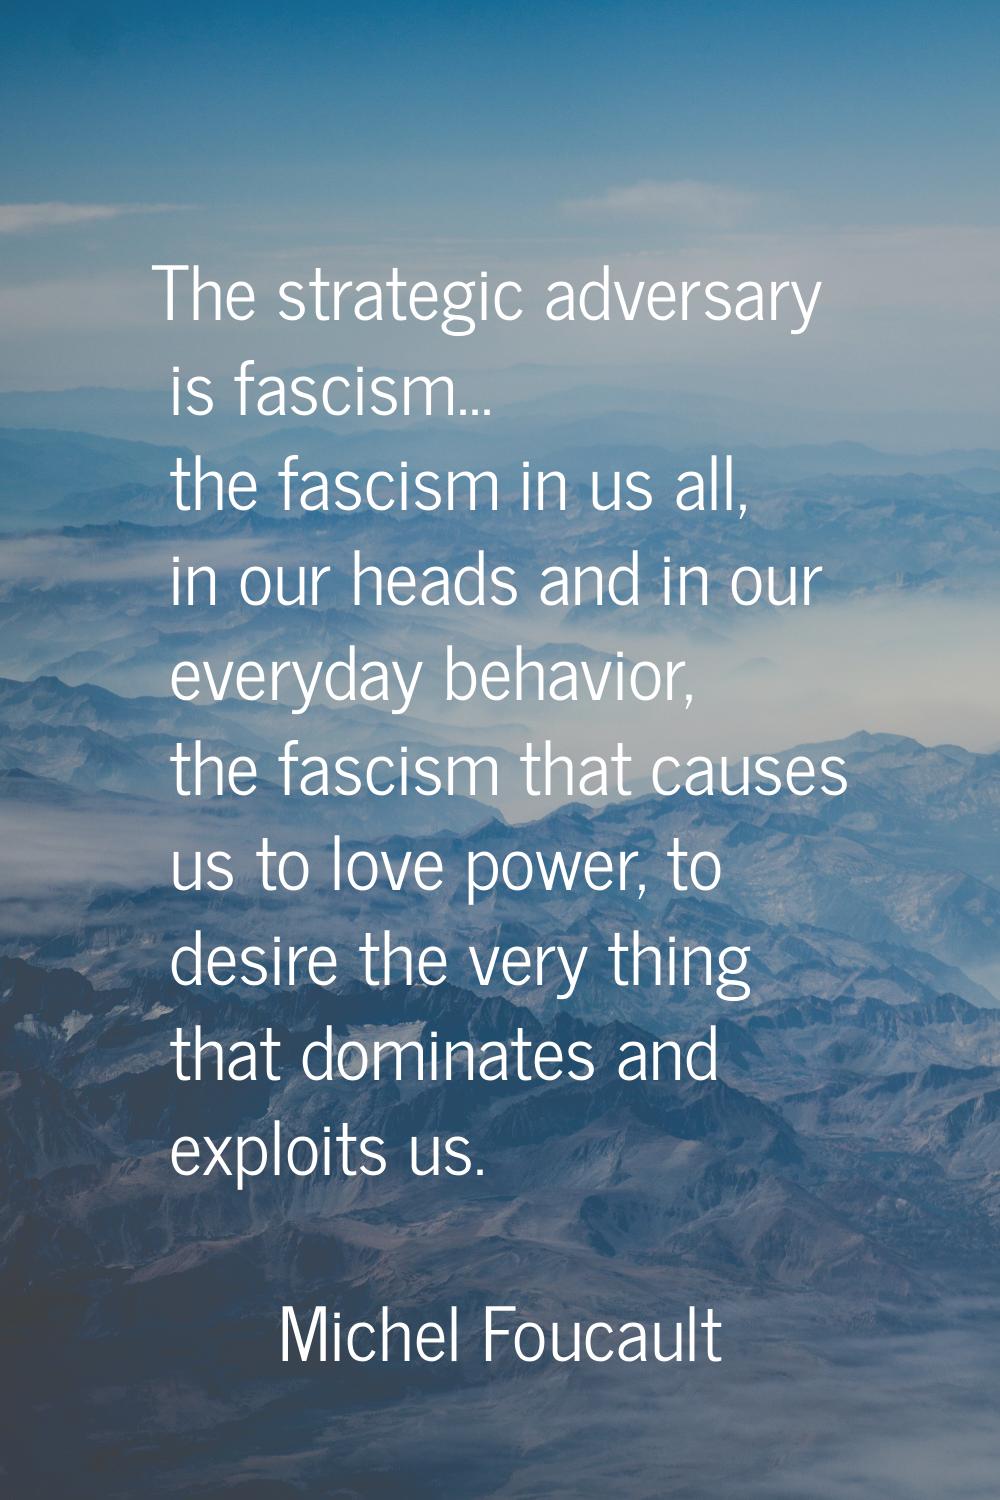 The strategic adversary is fascism... the fascism in us all, in our heads and in our everyday behav